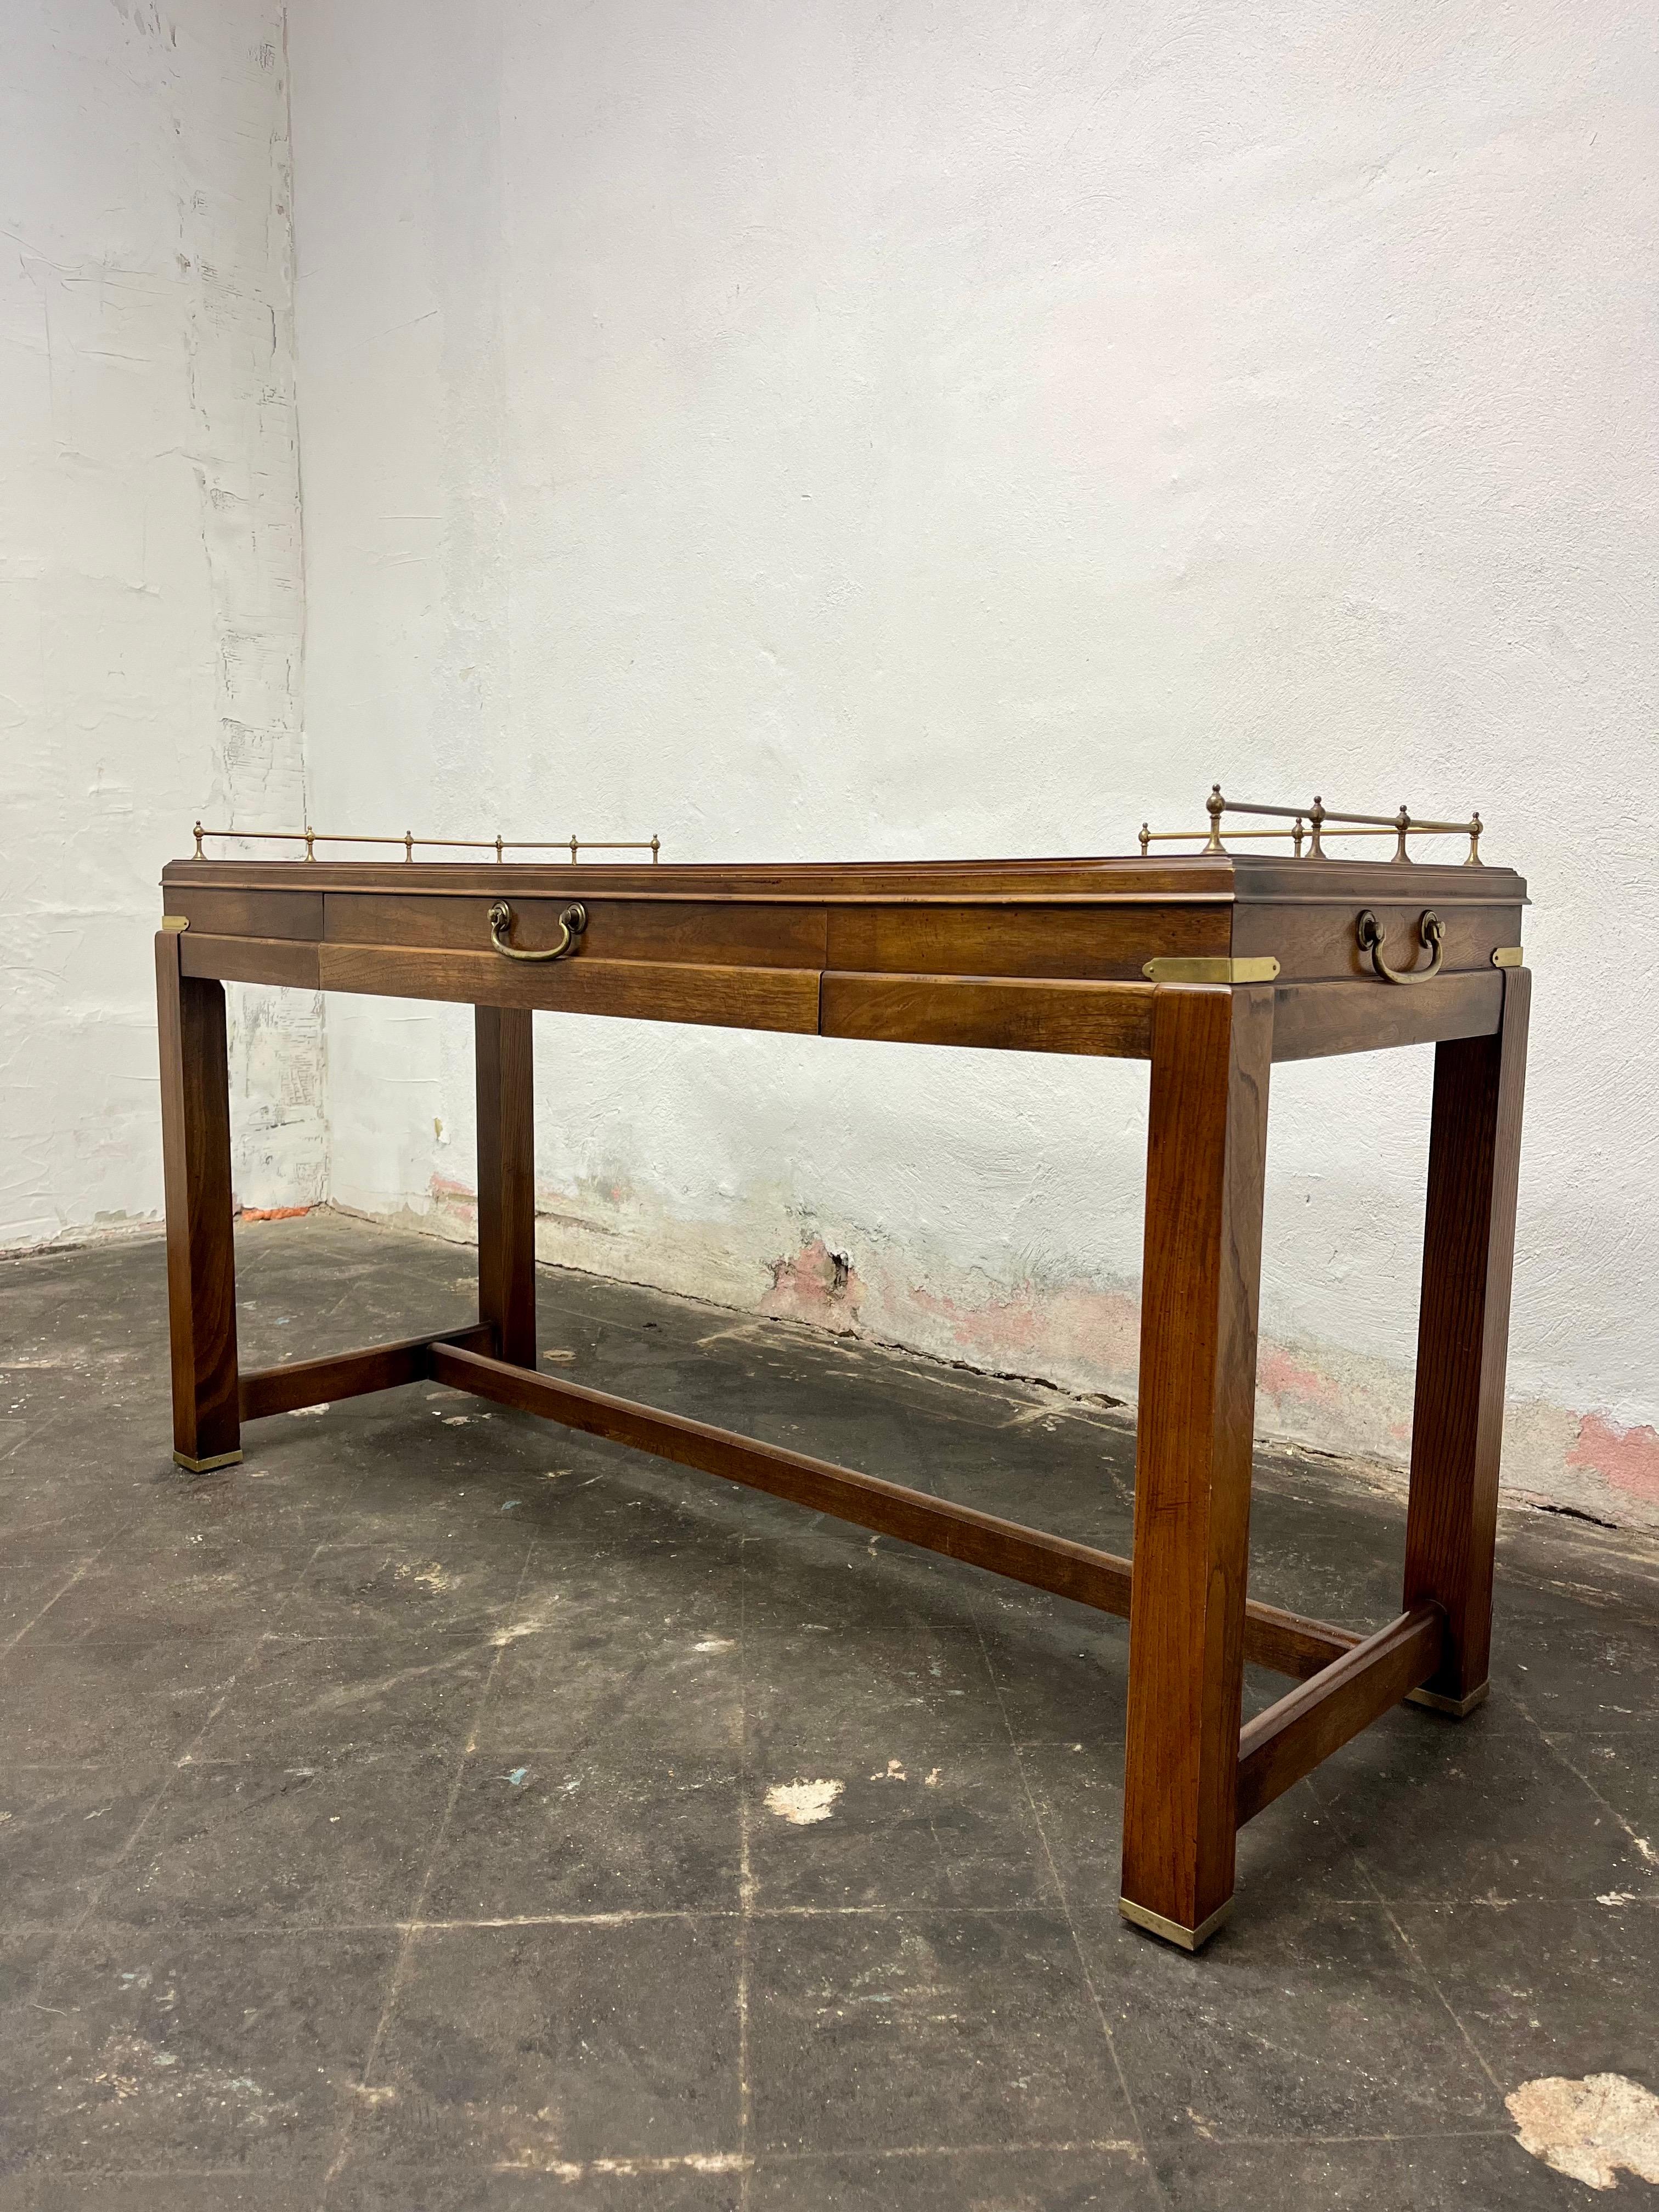 Lane Mid-Century Modern burl walnut serving or console table with brass gallery back
A truly stunning piece made by a great designer. The burled walnut has a stunning patina, the brass gallery to the back adds a sense of Regency glamour to the